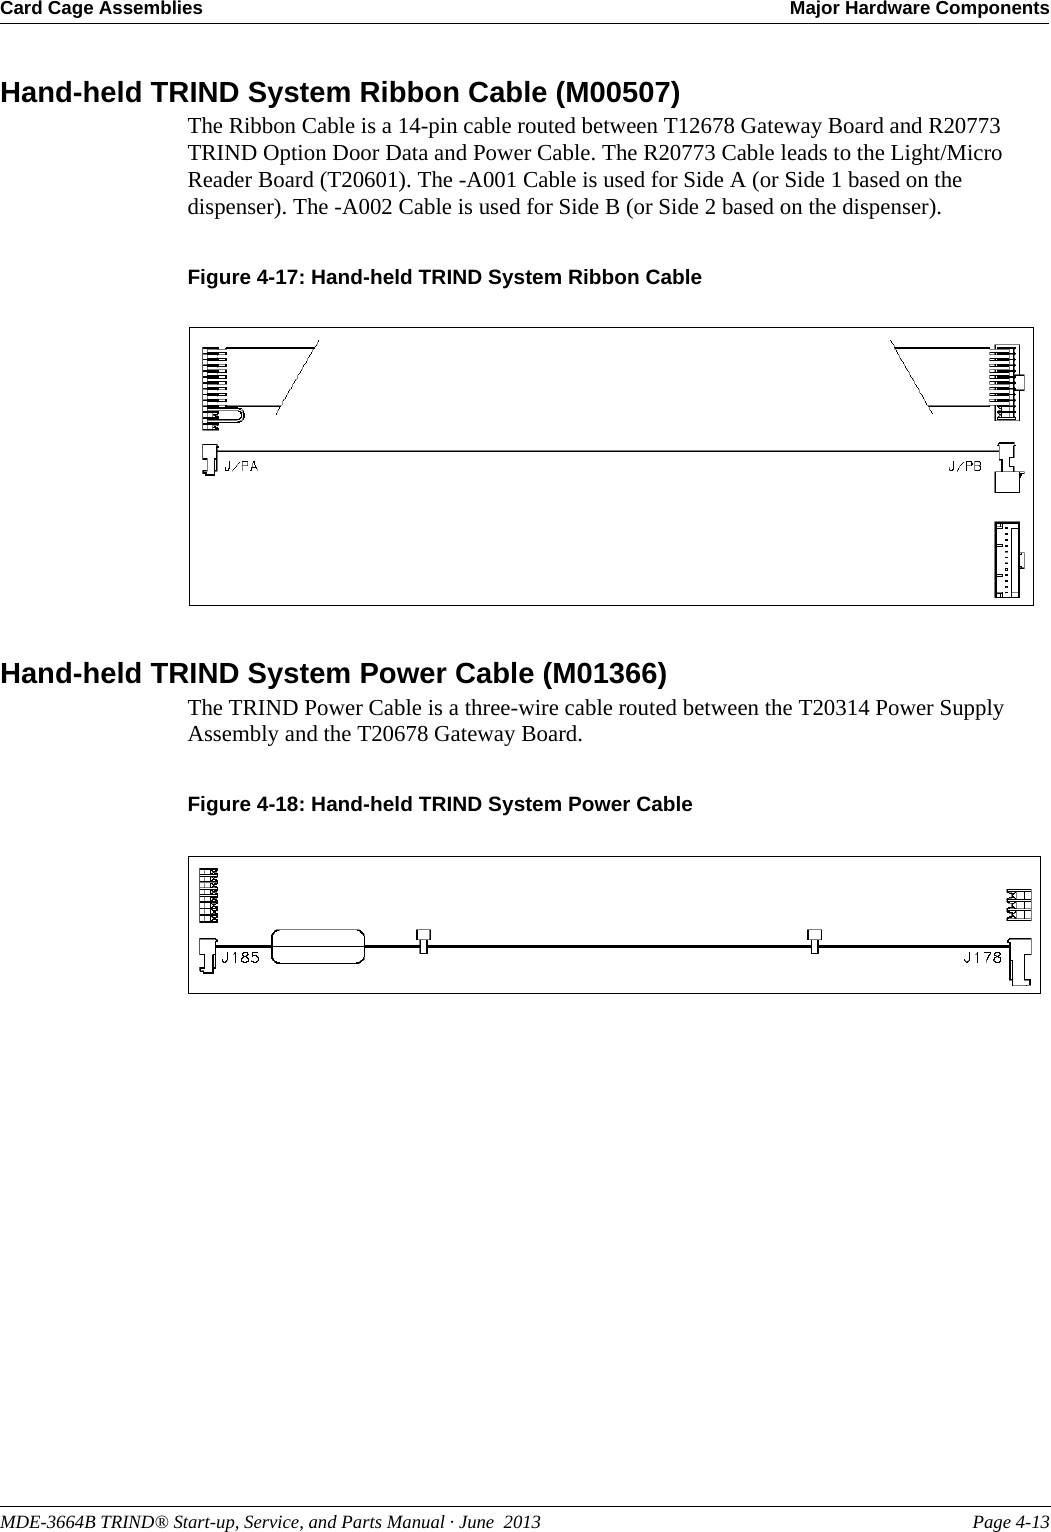 MDE-3664B TRIND® Start-up, Service, and Parts Manual · June  2013 Page 4-13Card Cage Assemblies Major Hardware ComponentsHand-held TRIND System Ribbon Cable (M00507)The Ribbon Cable is a 14-pin cable routed between T12678 Gateway Board and R20773 TRIND Option Door Data and Power Cable. The R20773 Cable leads to the Light/Micro Reader Board (T20601). The -A001 Cable is used for Side A (or Side 1 based on the dispenser). The -A002 Cable is used for Side B (or Side 2 based on the dispenser).Figure 4-17: Hand-held TRIND System Ribbon CableHand-held TRIND System Power Cable (M01366)The TRIND Power Cable is a three-wire cable routed between the T20314 Power Supply Assembly and the T20678 Gateway Board.Figure 4-18: Hand-held TRIND System Power Cable